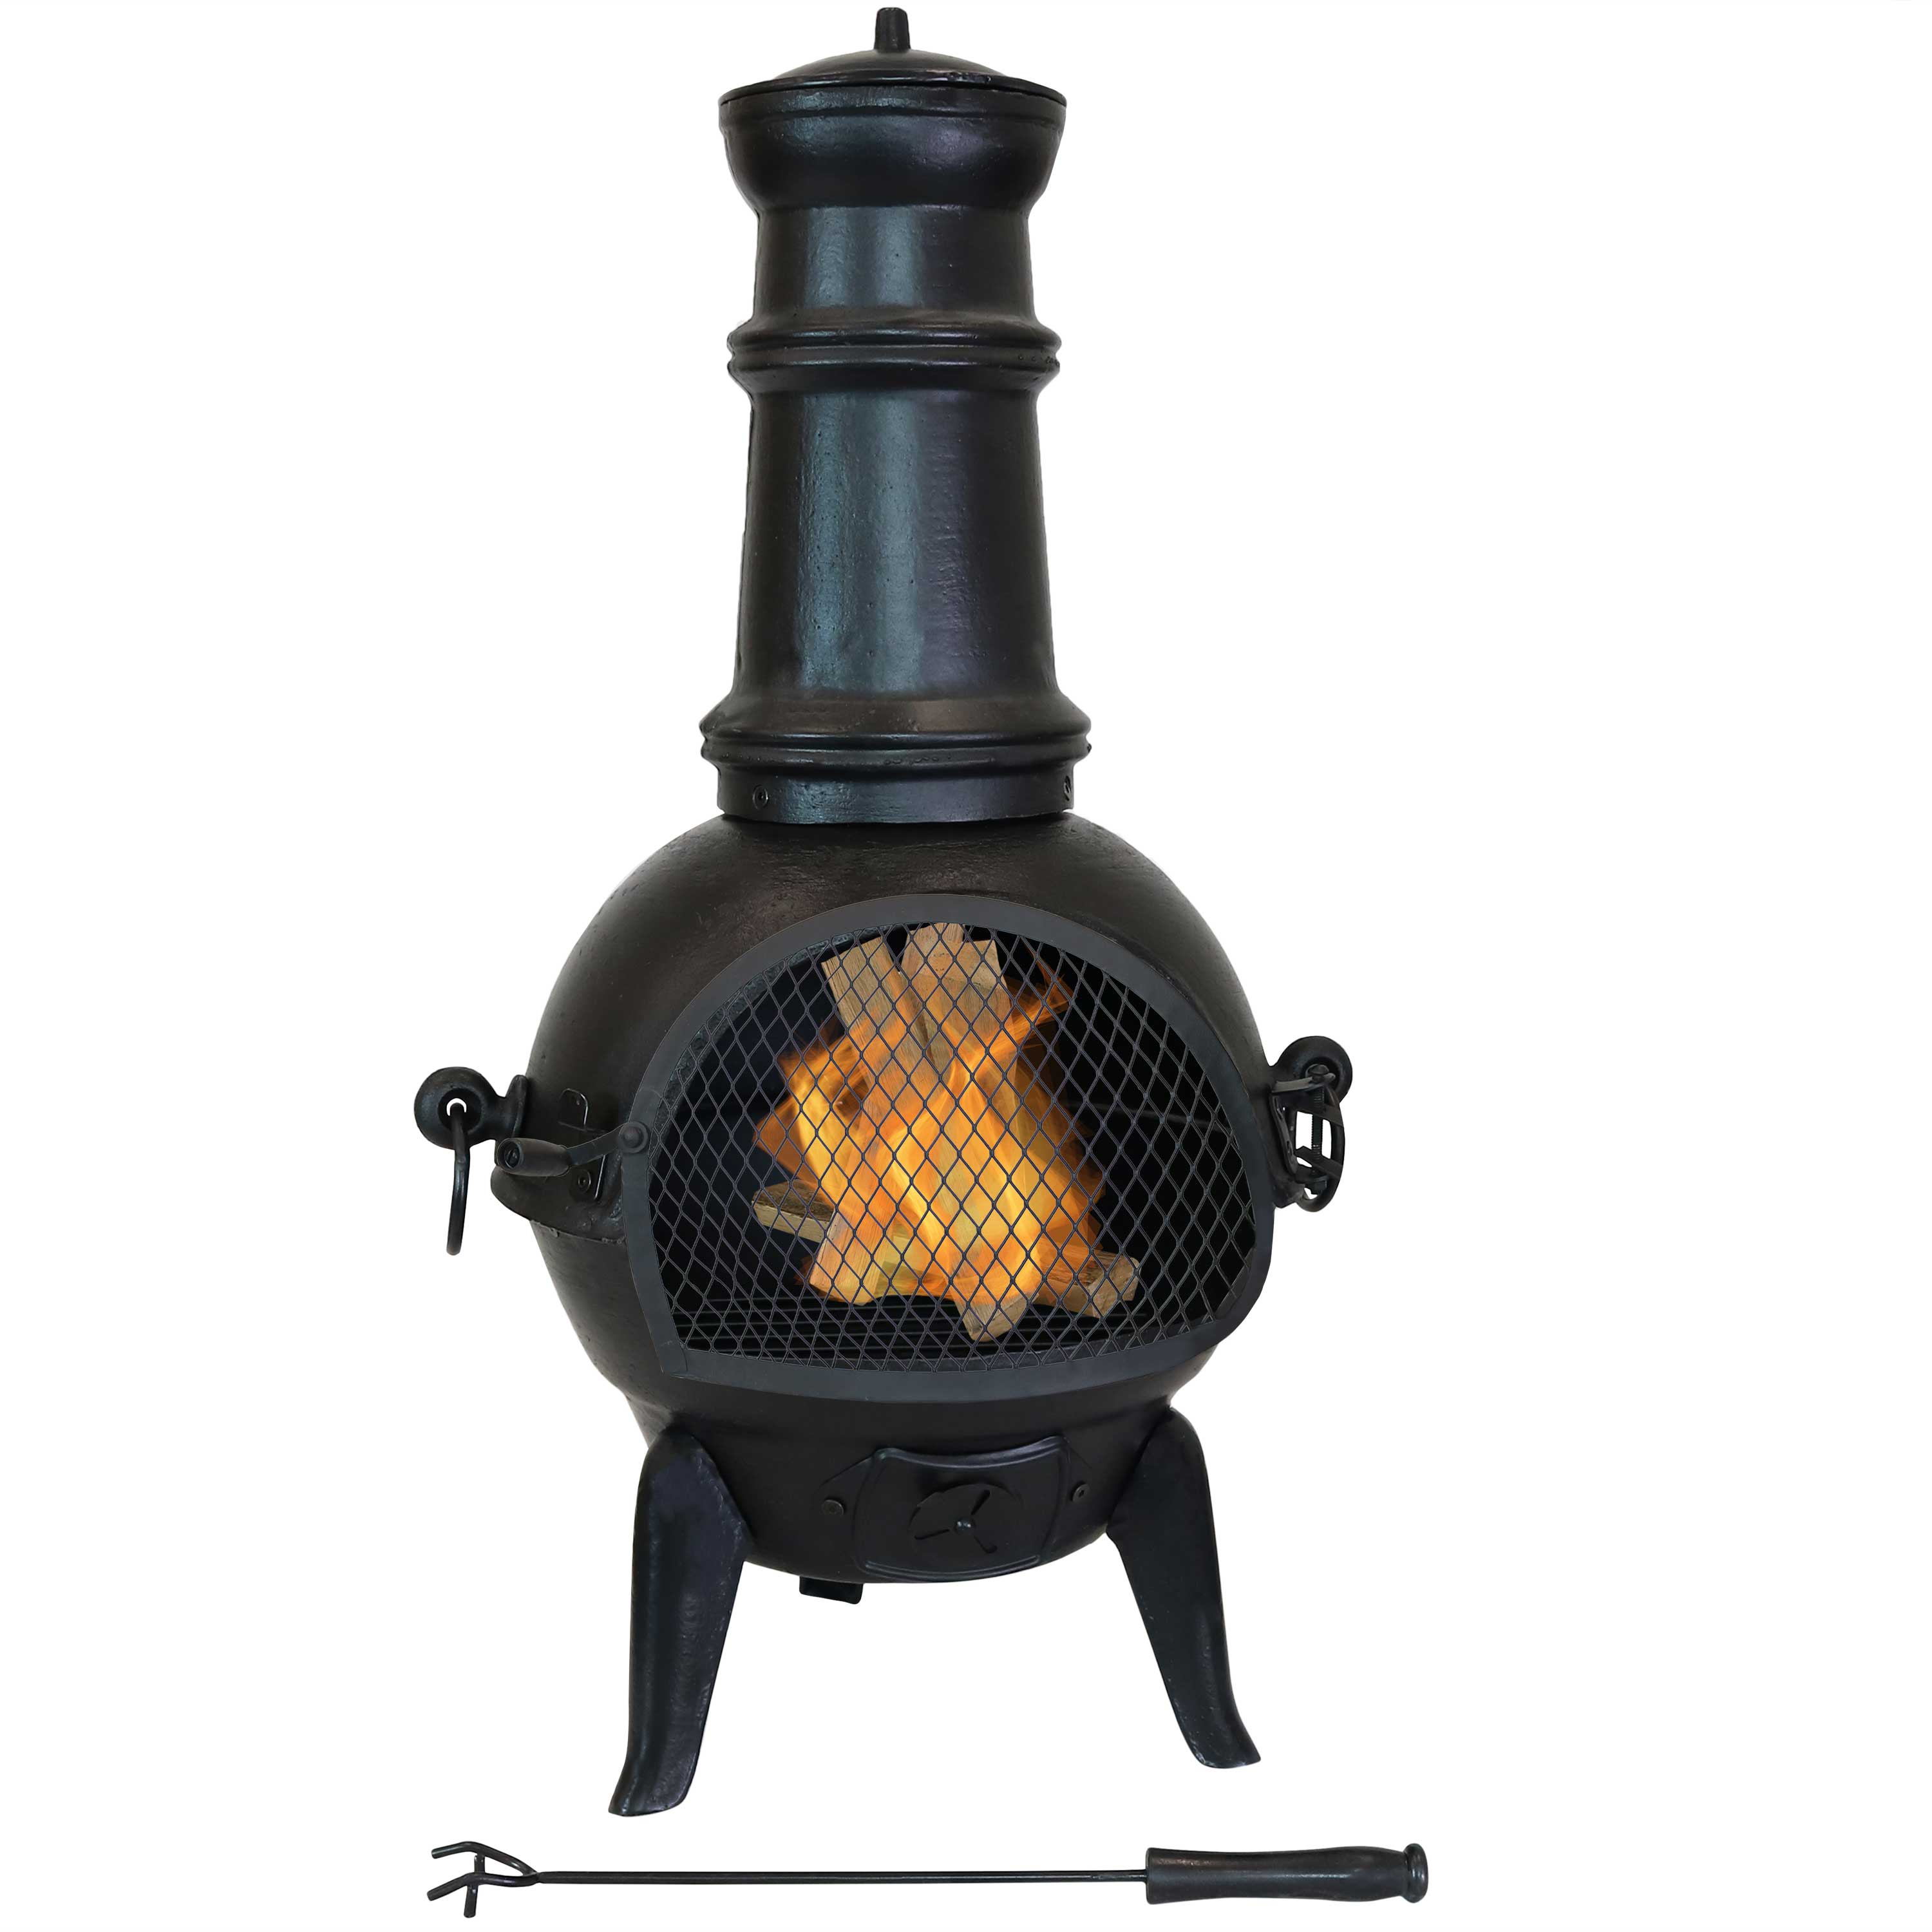 Sunnydaze Decor 34 In H X 15 5 In D X 18 In W Black Cast Iron Chiminea At Lowes Com